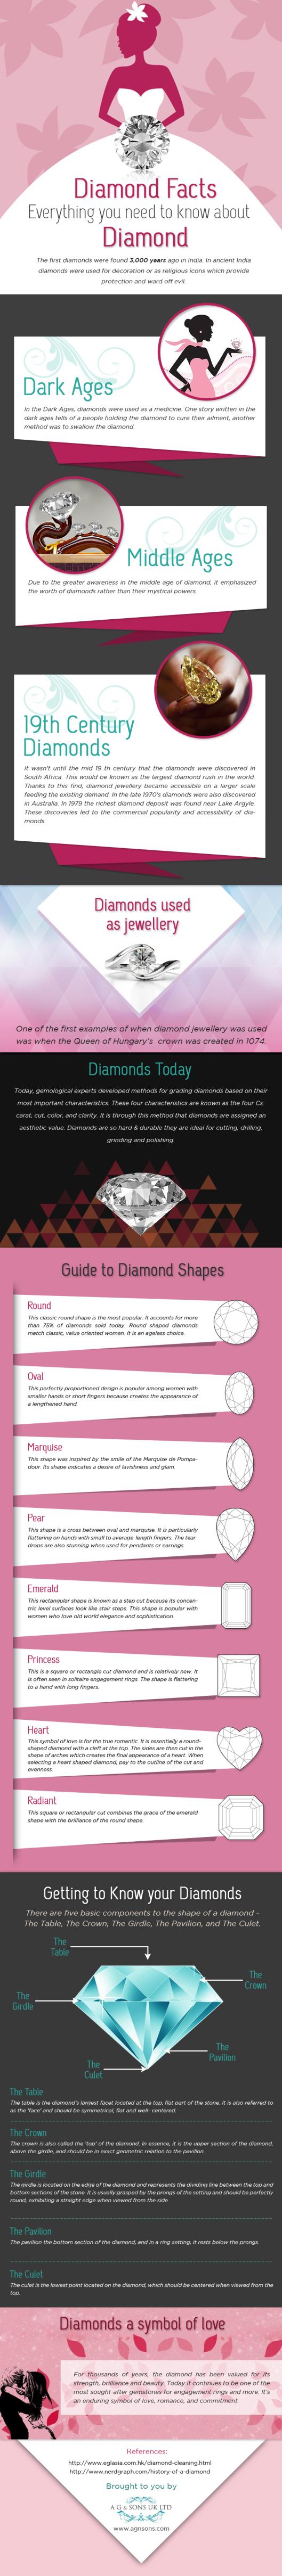 Wedding - Everthing You Need To Know About Diamonds